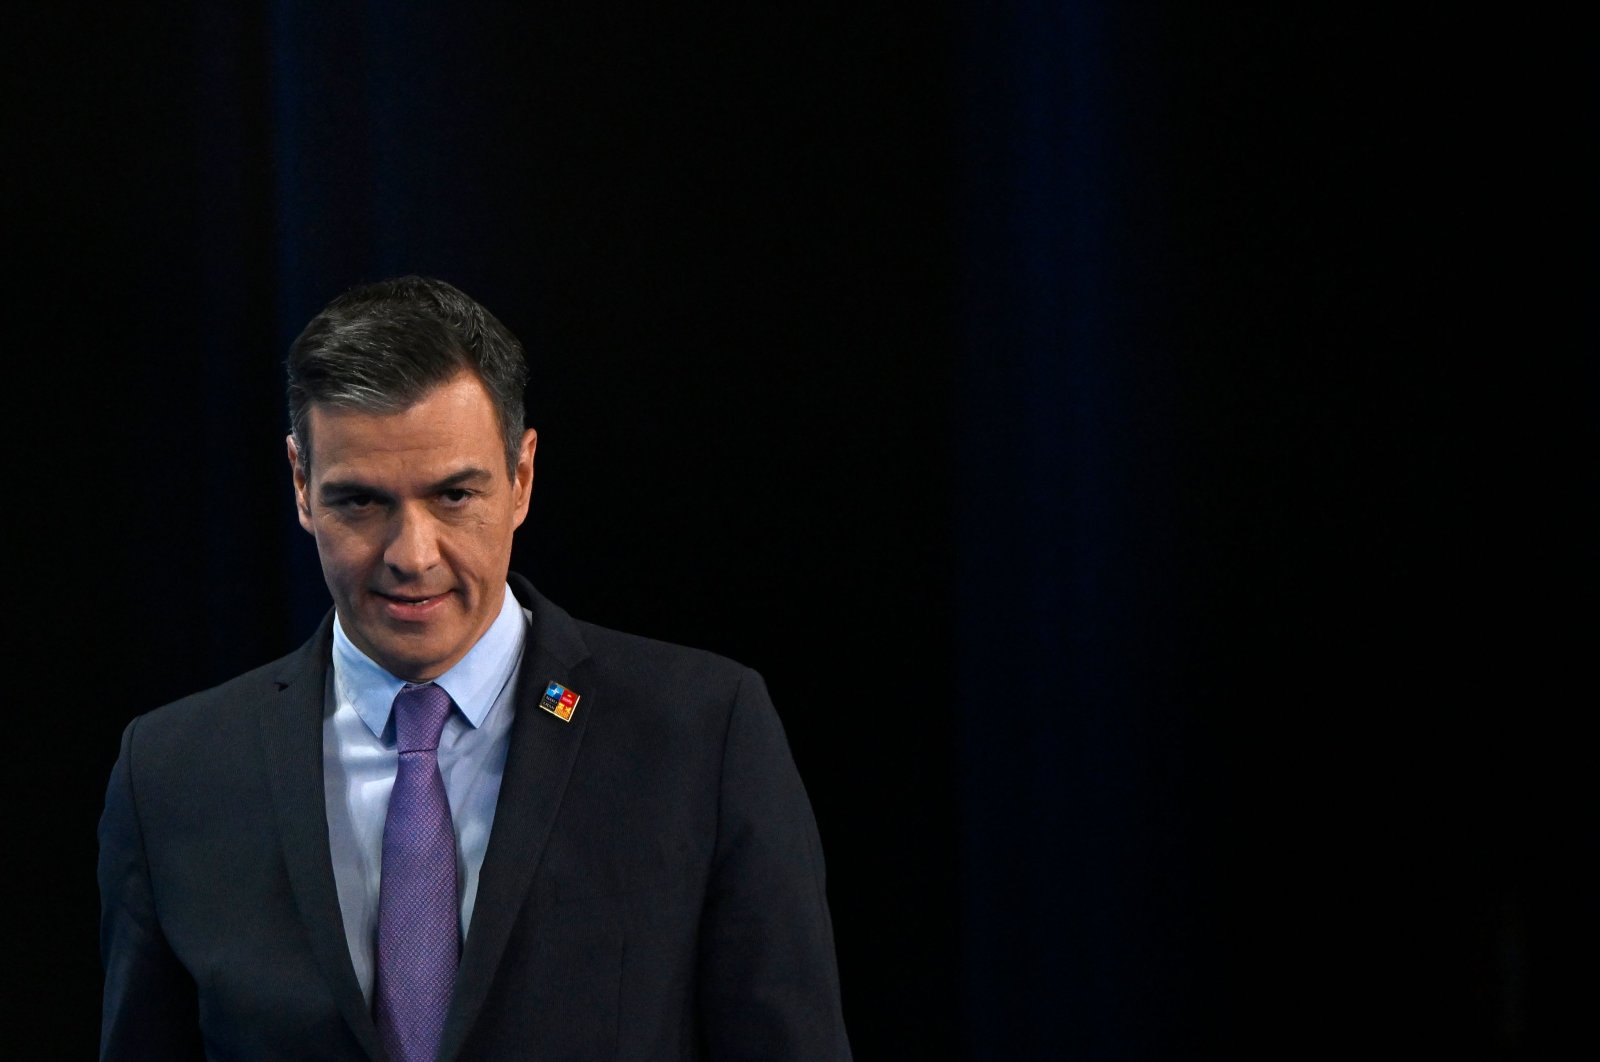 Spanish Prime Minister Pedro Sanchez arrives at a press conference at the recent NATO summit in Madrid, Spain, June 30, 2022. (AFP Photo)